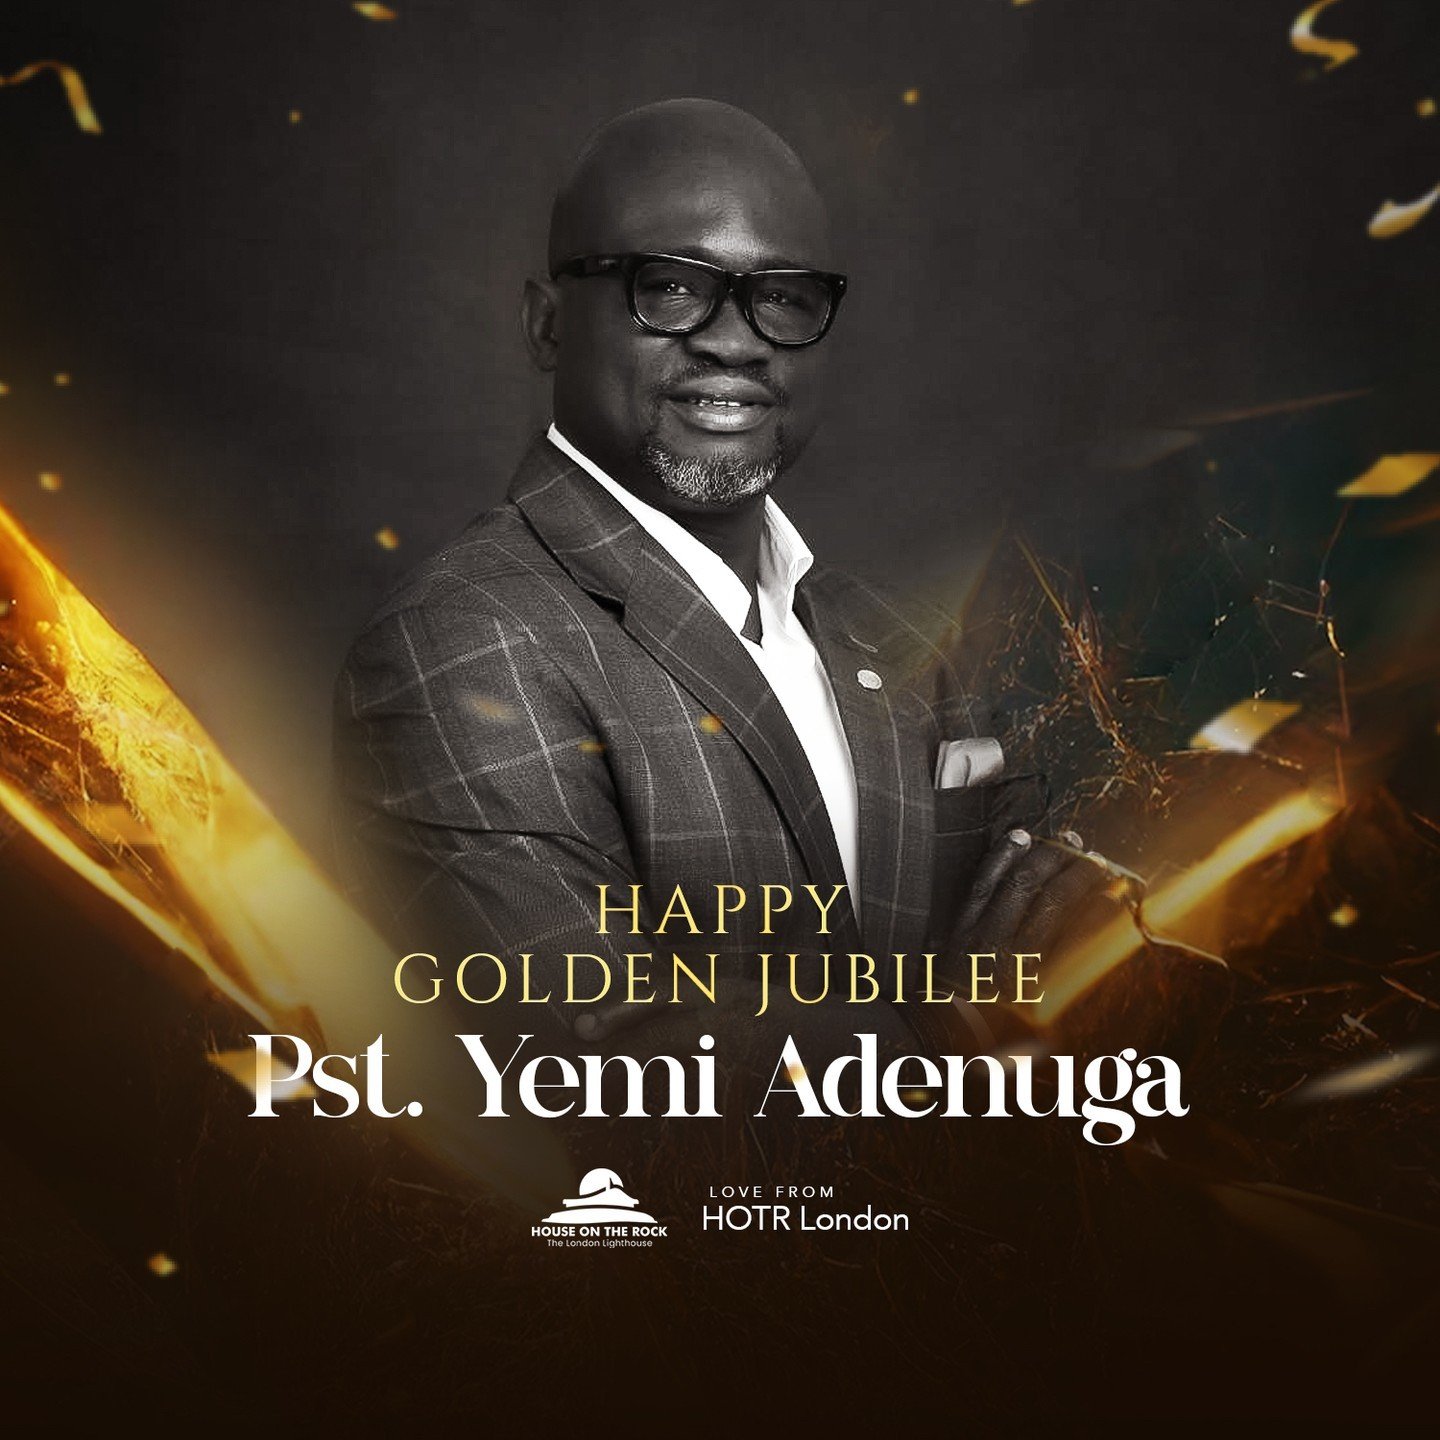 When a Son is also an Elder supporting the reins of Ministry through humble and committed service, that Son is worthy of celebration🙌🏾. 

Today, the entire HOTR London family celebrates you, our Dear Pastor Yemi Adenuga @lajad3 on your Golden Jubil